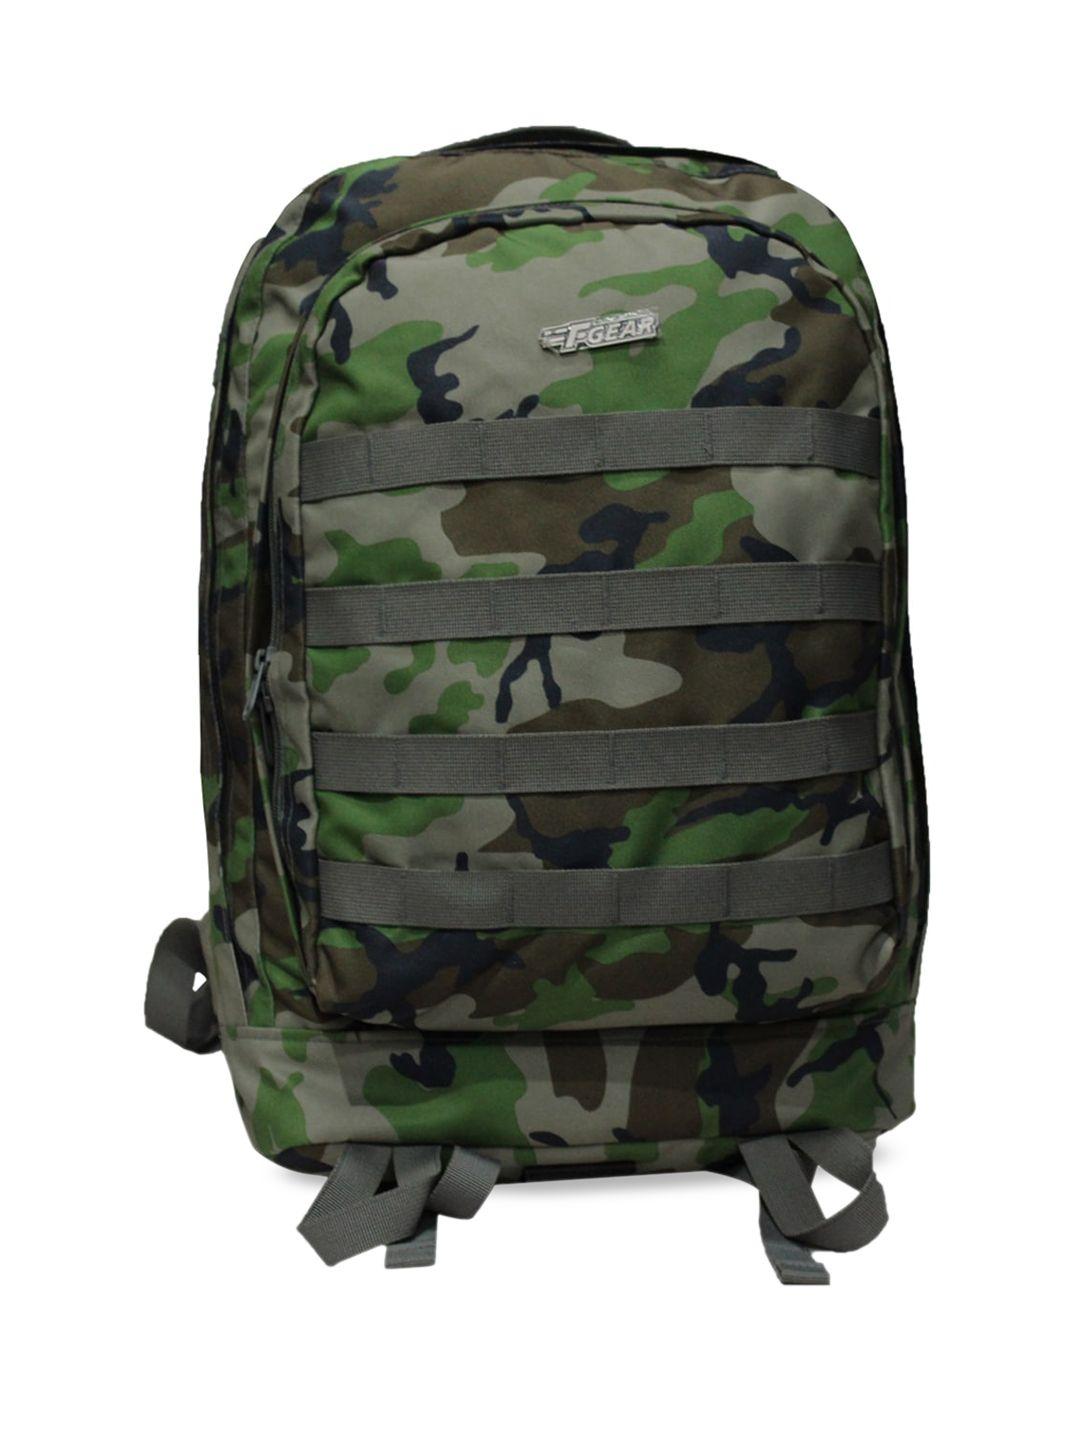 f gear unisex olive green & grey camouflage backpack